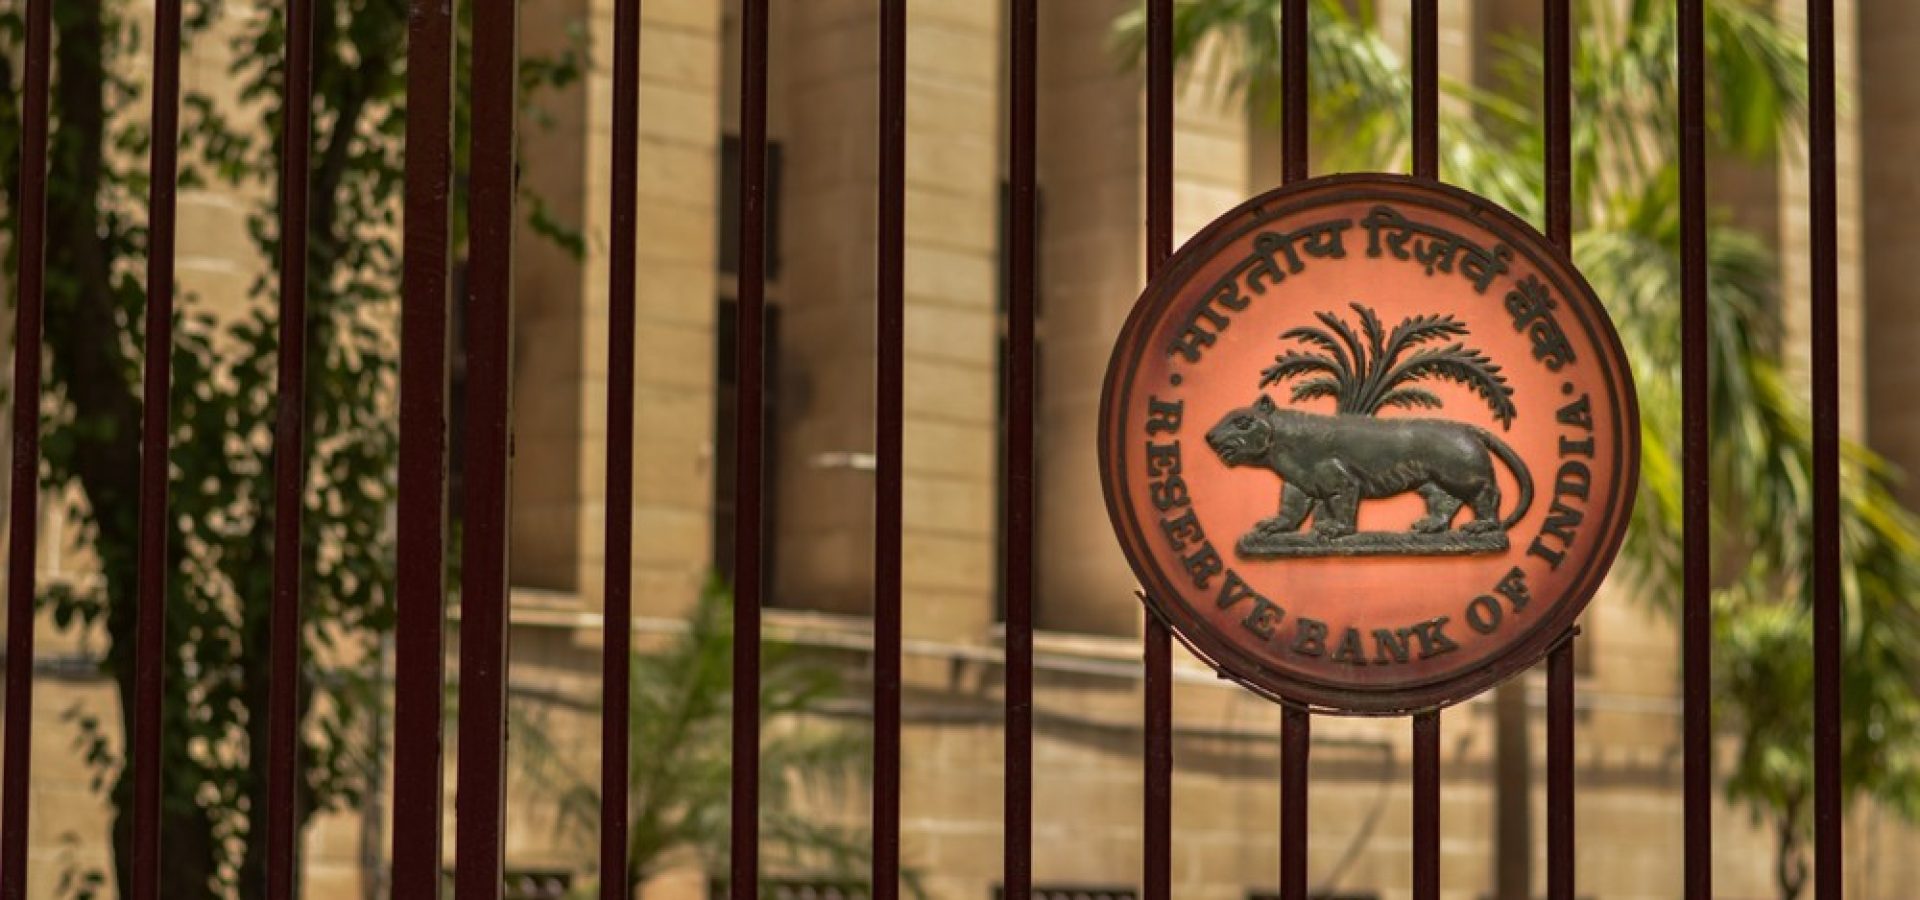 Wibest – Reserve Bank of India: The logo of the RBI on its gate.